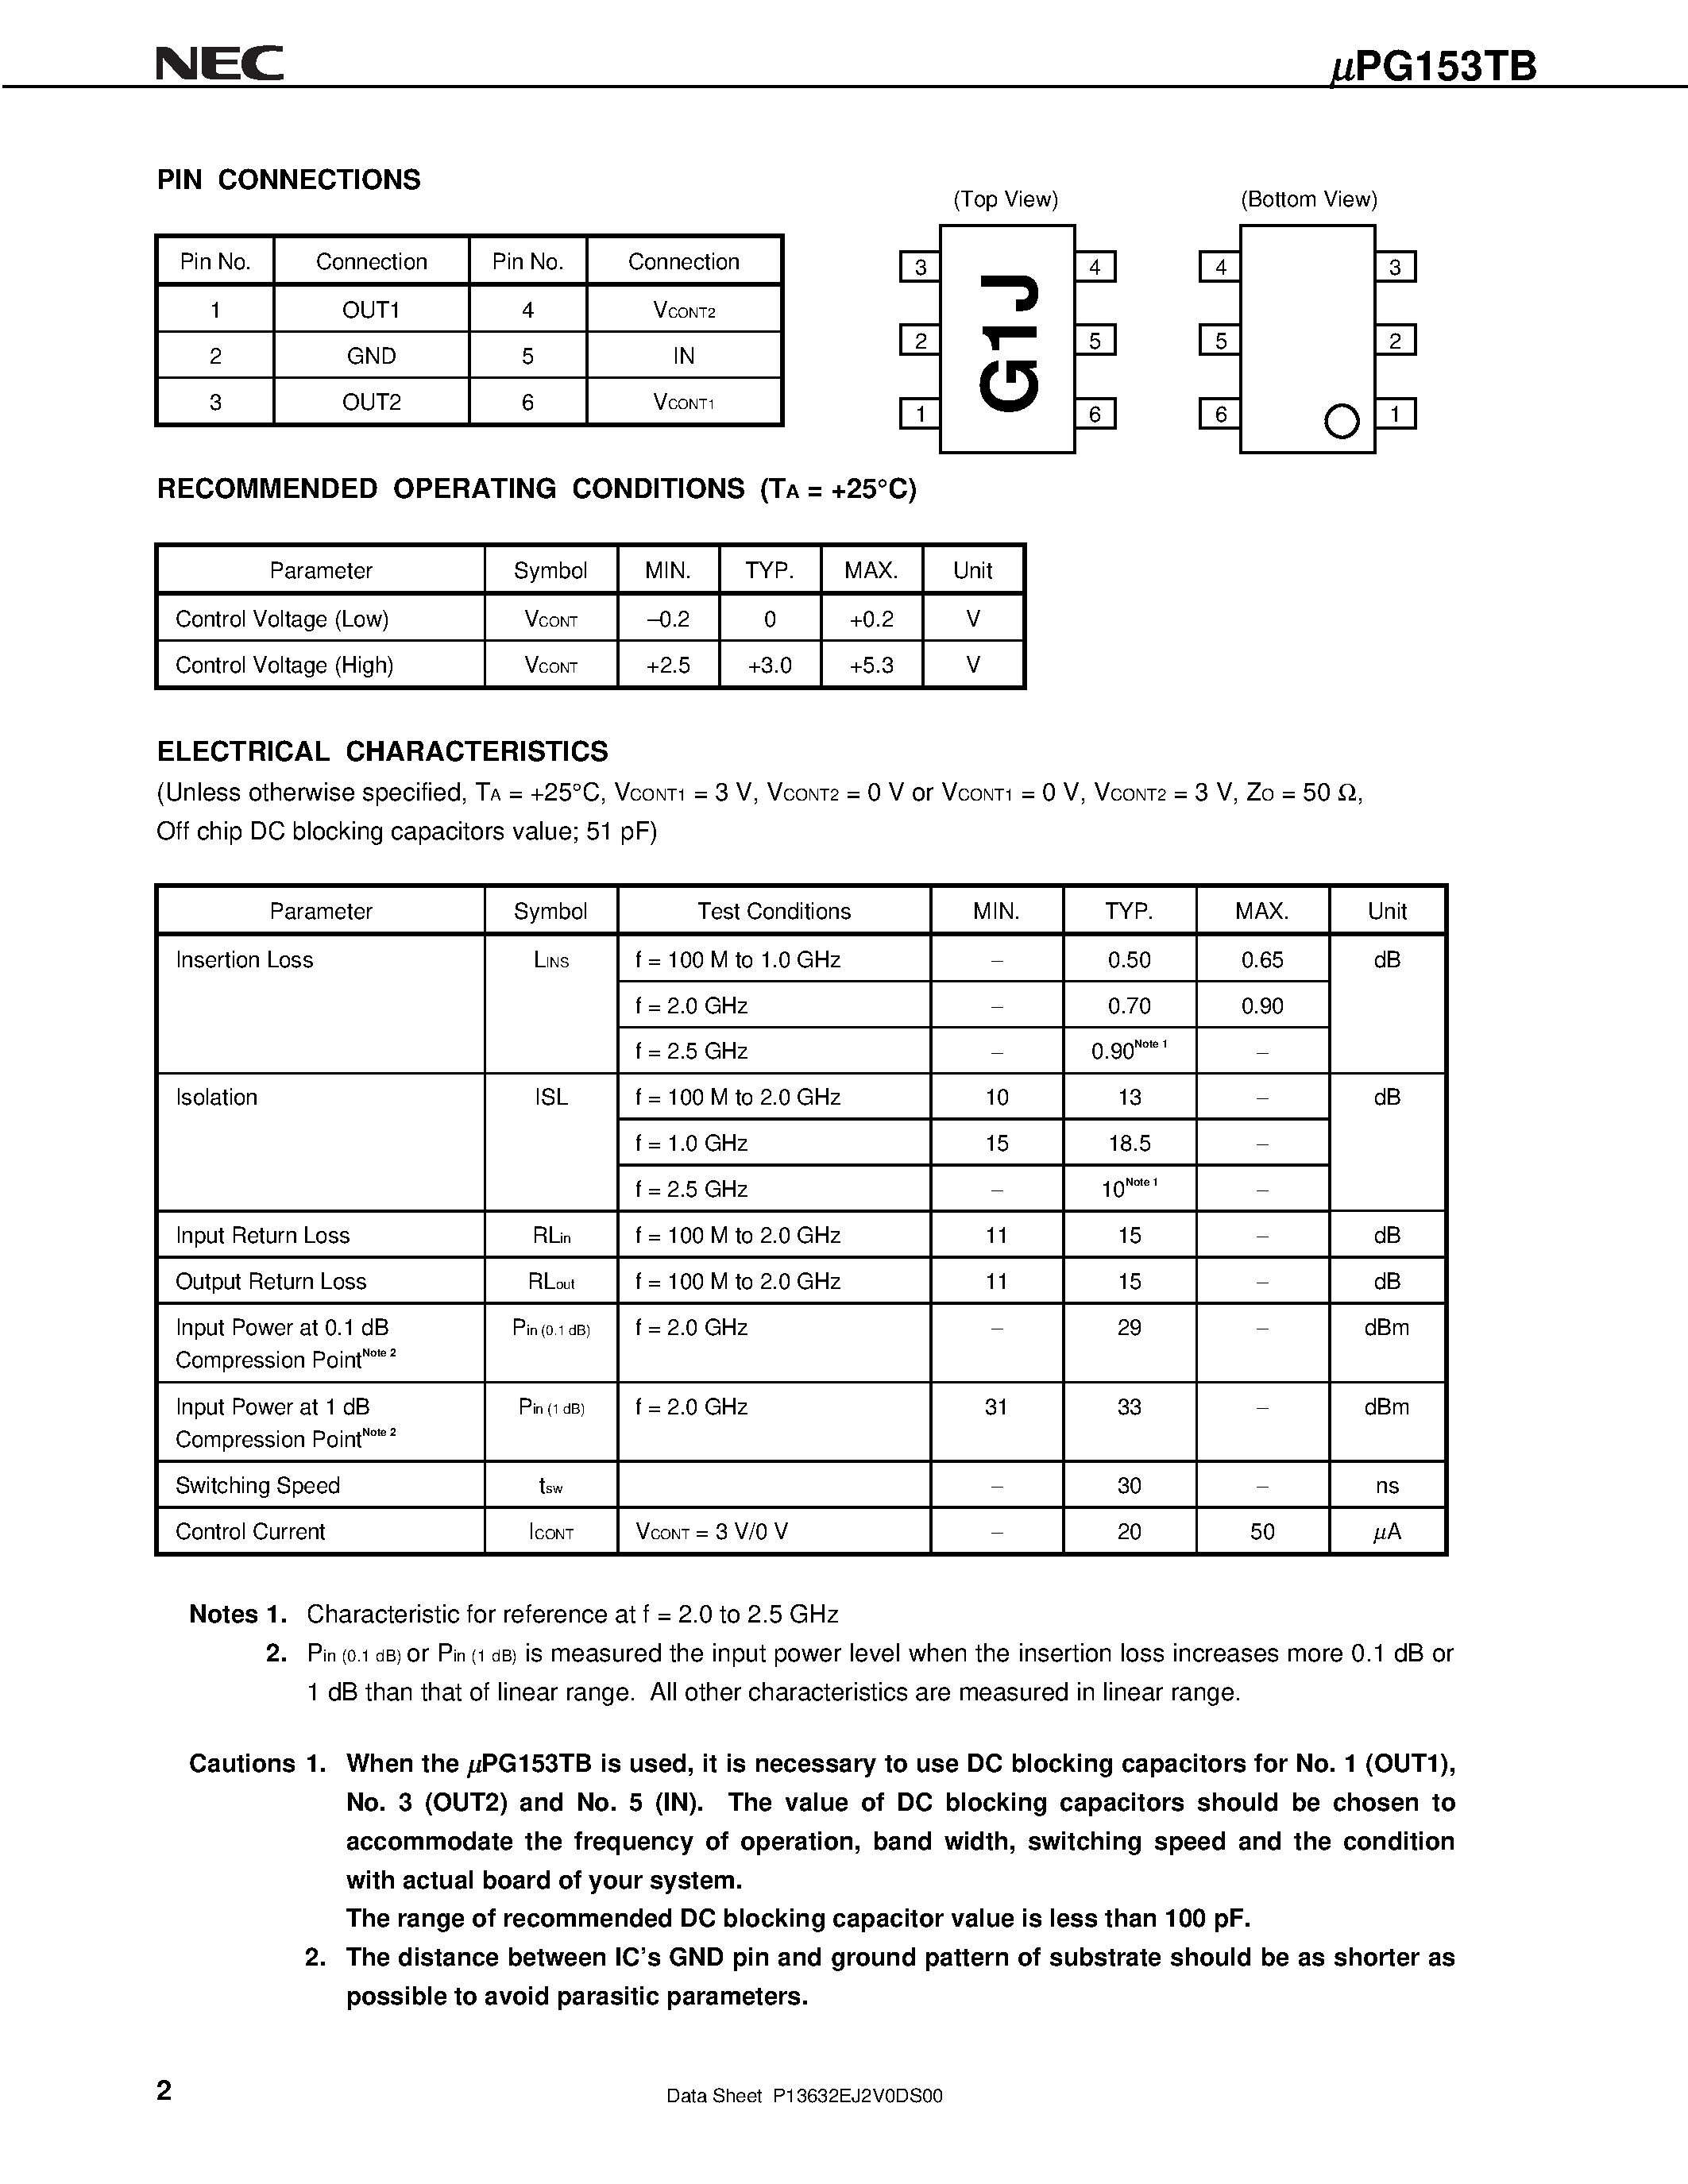 Datasheet UPG153TB - L-BAND SPDT SWITCH page 2